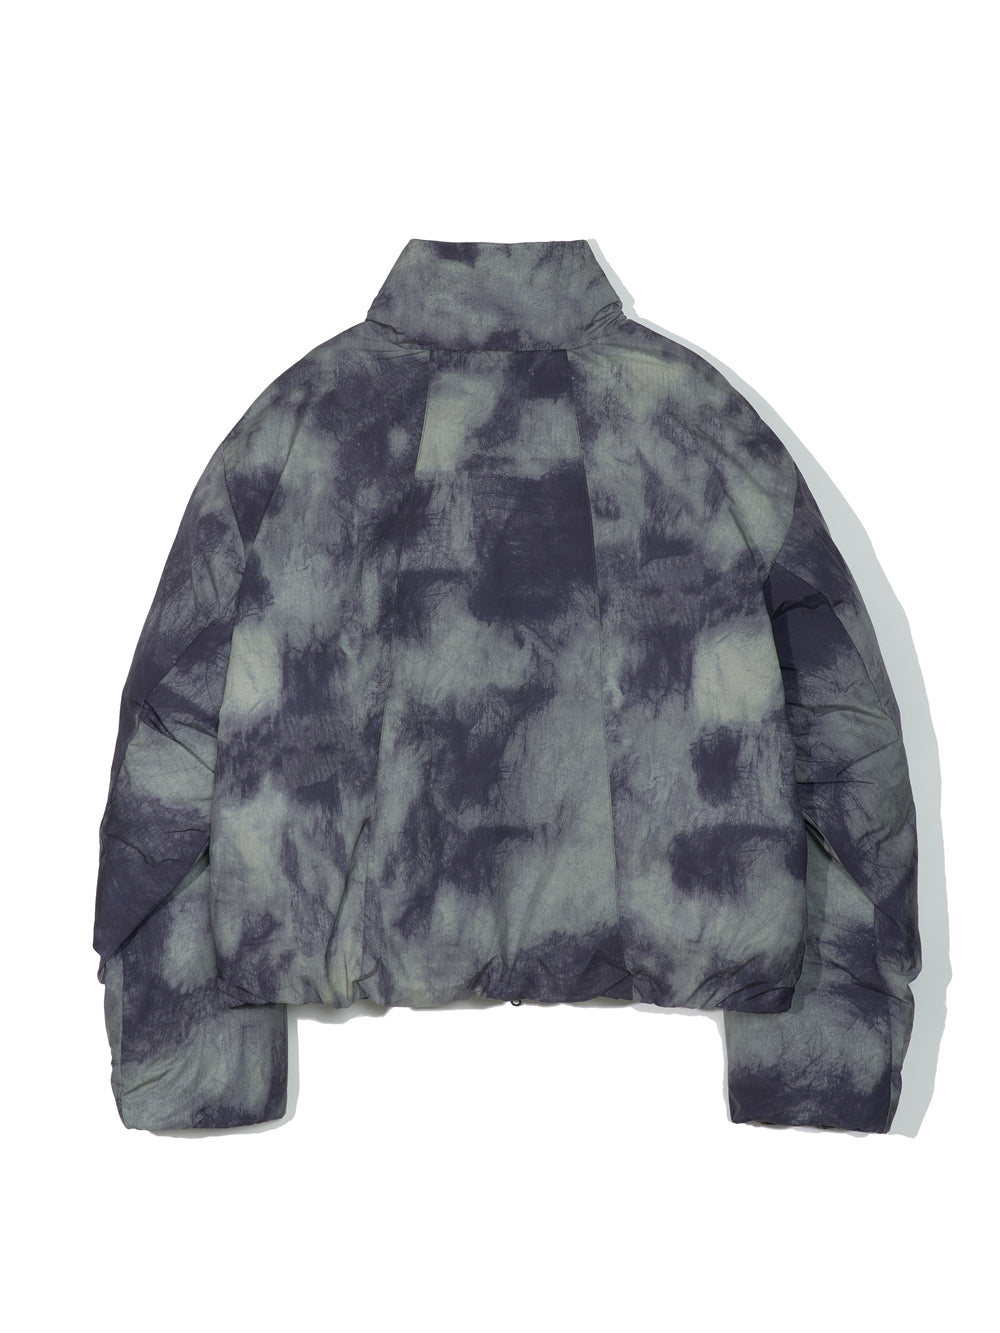 3M Thinsulate Featherless Short Padding Jacket in Dyeing Prints